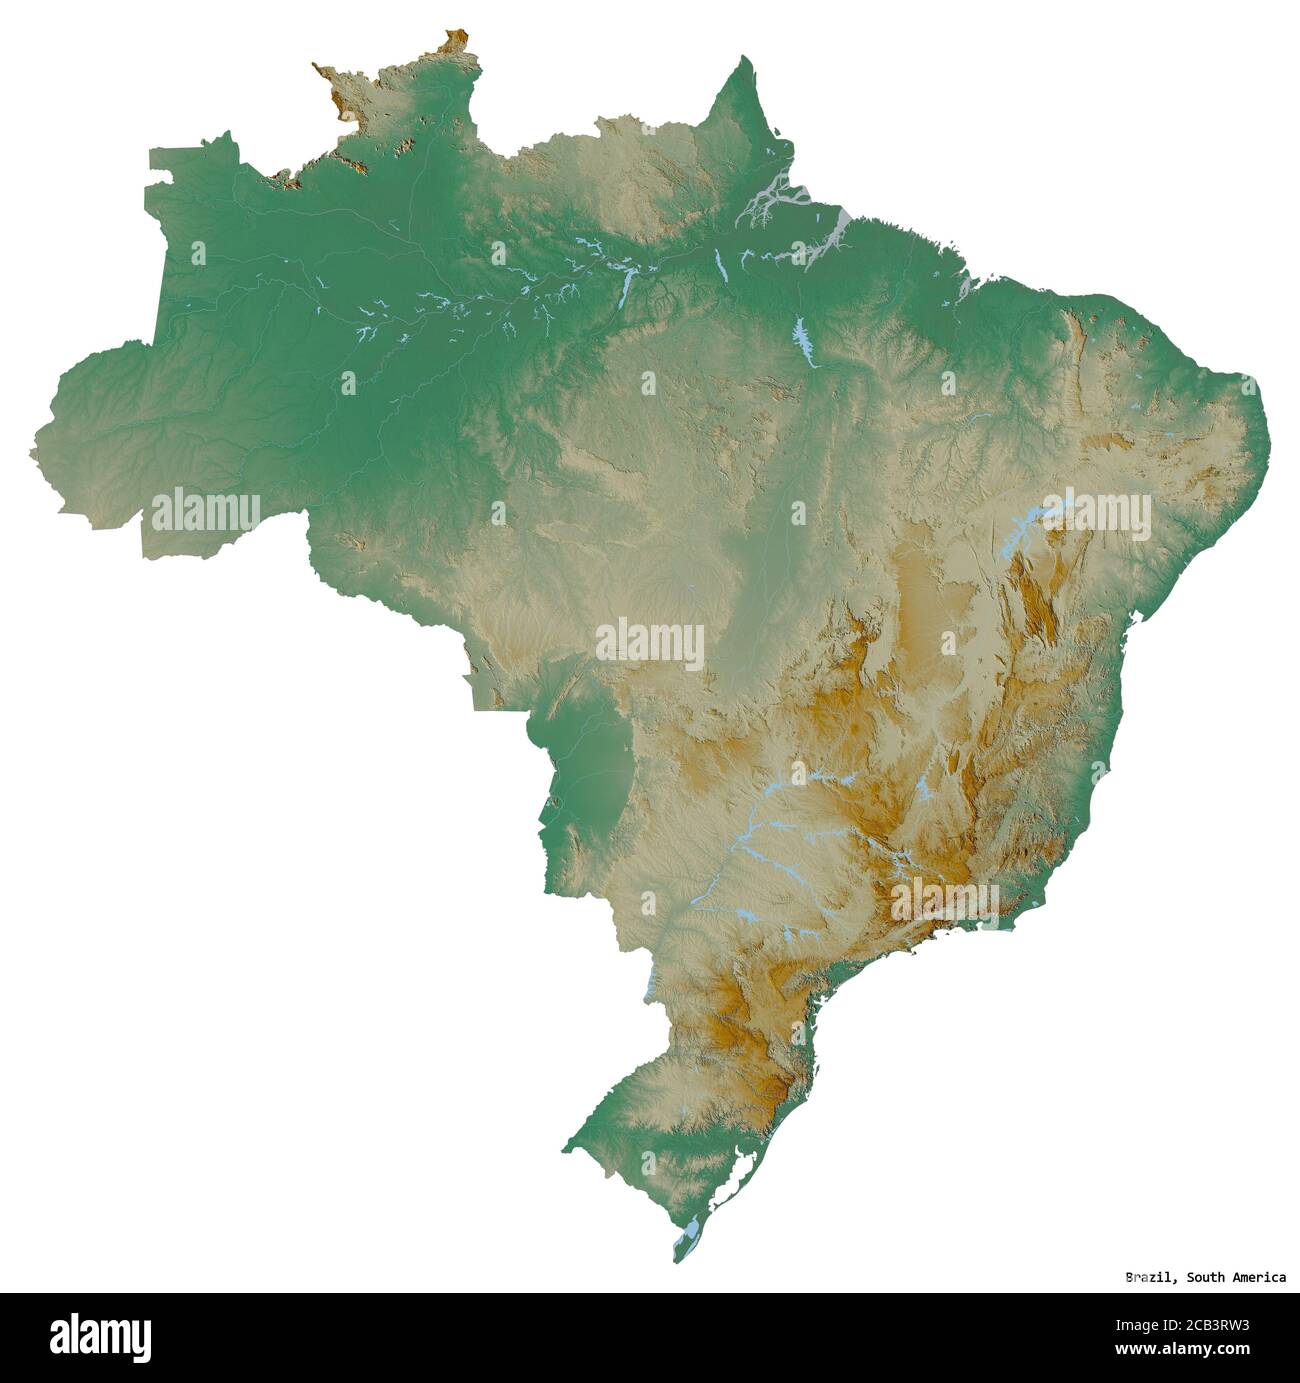 https://c8.alamy.com/comp/2CB3RW3/shape-of-brazil-with-its-capital-isolated-on-white-background-topographic-relief-map-3d-rendering-2CB3RW3.jpg